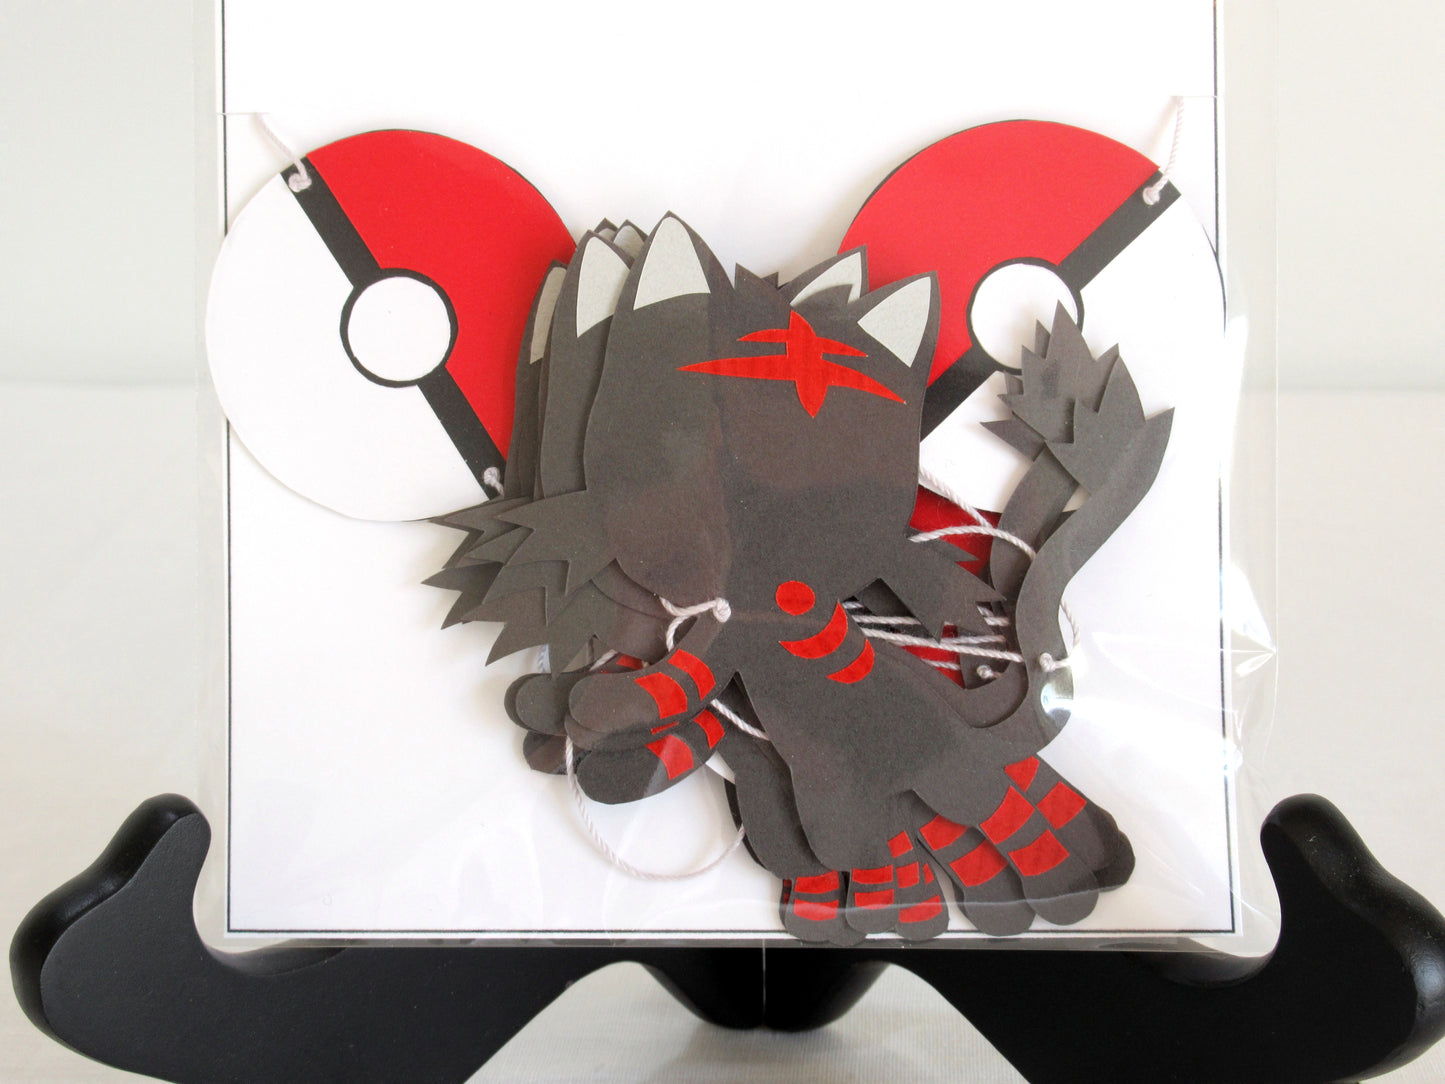 A close up of paper littens and pokeballs on a string inside a clear bag.